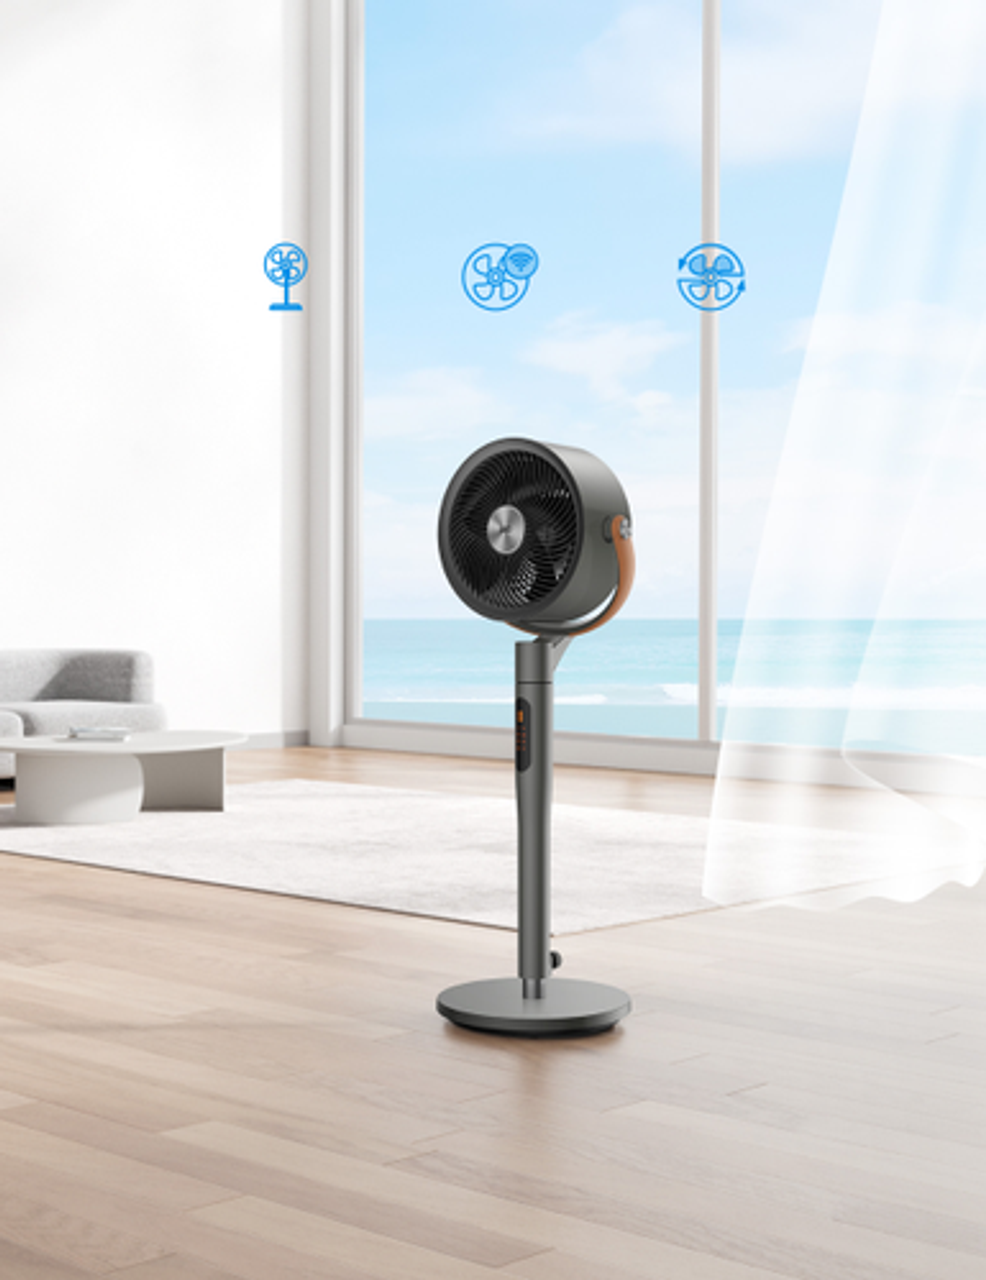 Dreo - Pedestal Fan with Remote, 120° + 105°Smart Oscillating Floor Fans with Wi-Fi/Voice Control, Works with Alexa/Google - Gray